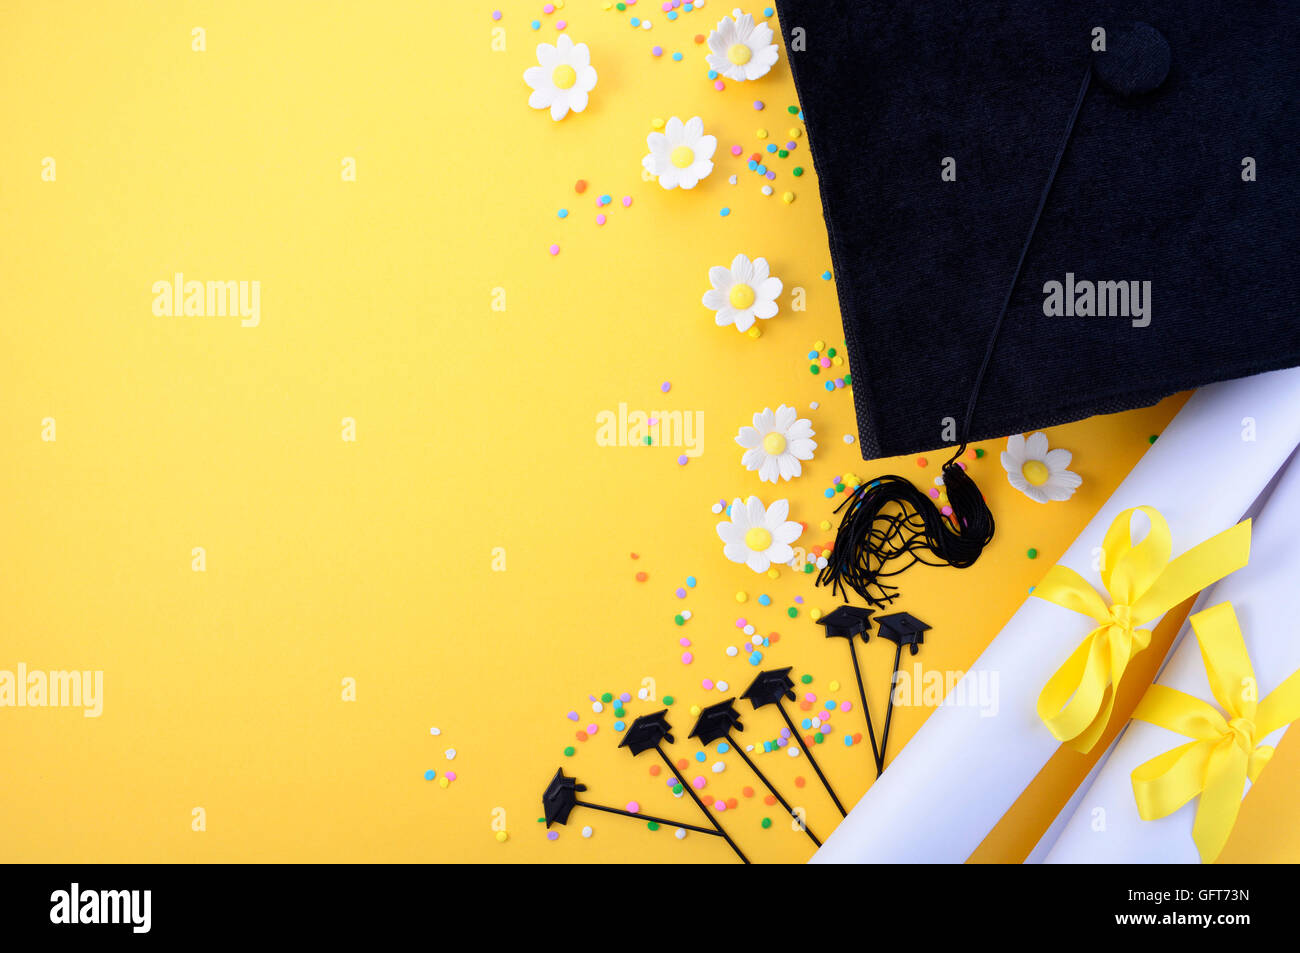 Yellow black and white theme graduation background with decorated borders on yellow background. Stock Photo